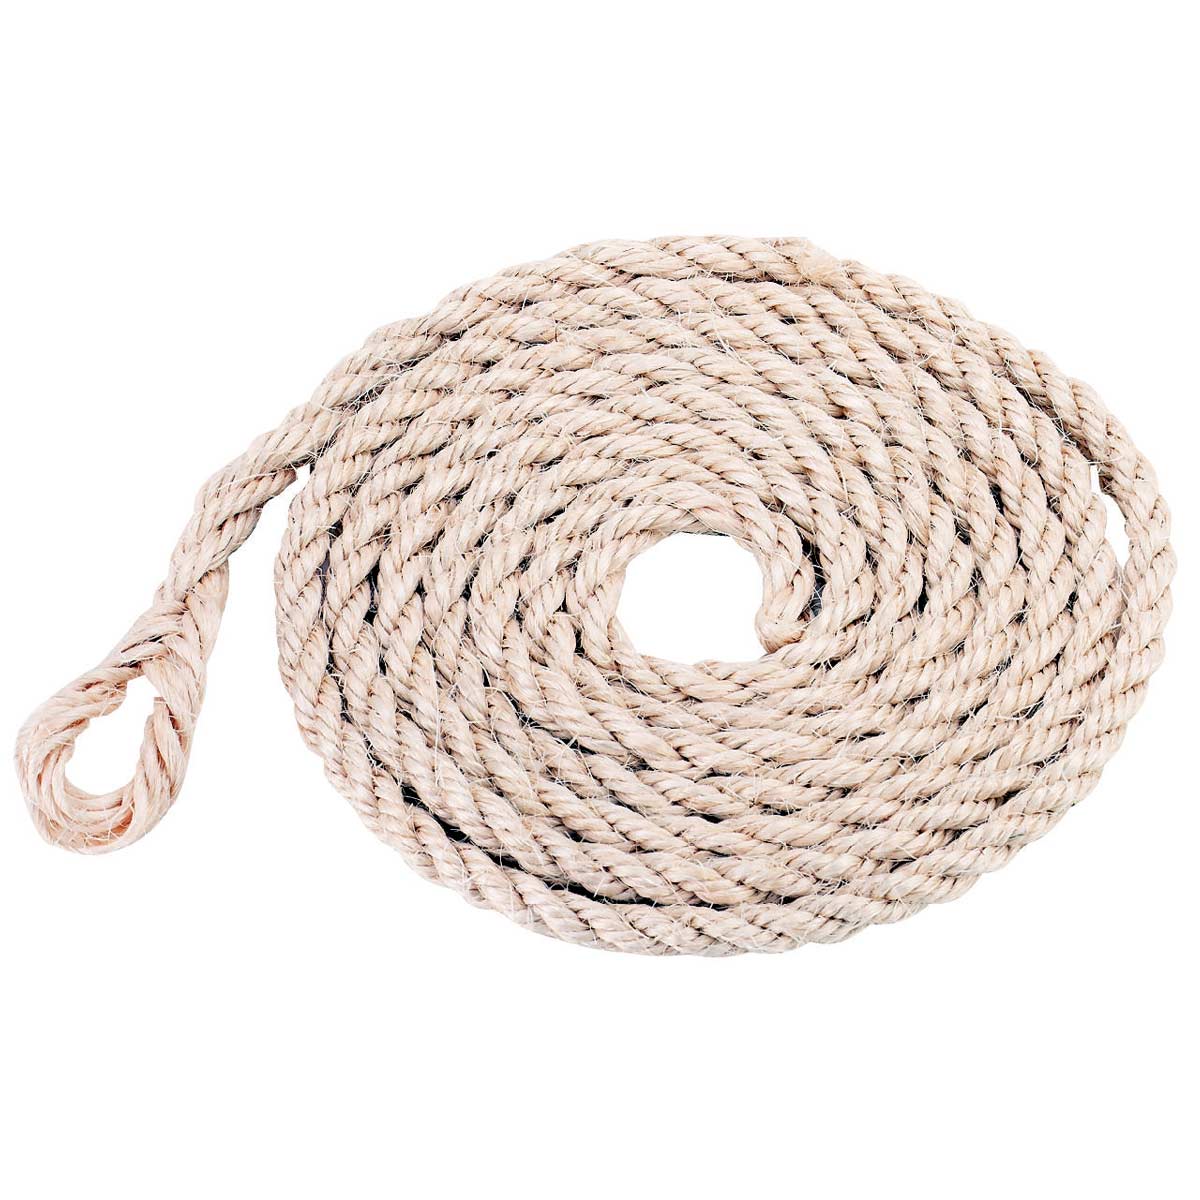 Rope 100 % sisal 320 m with small loop